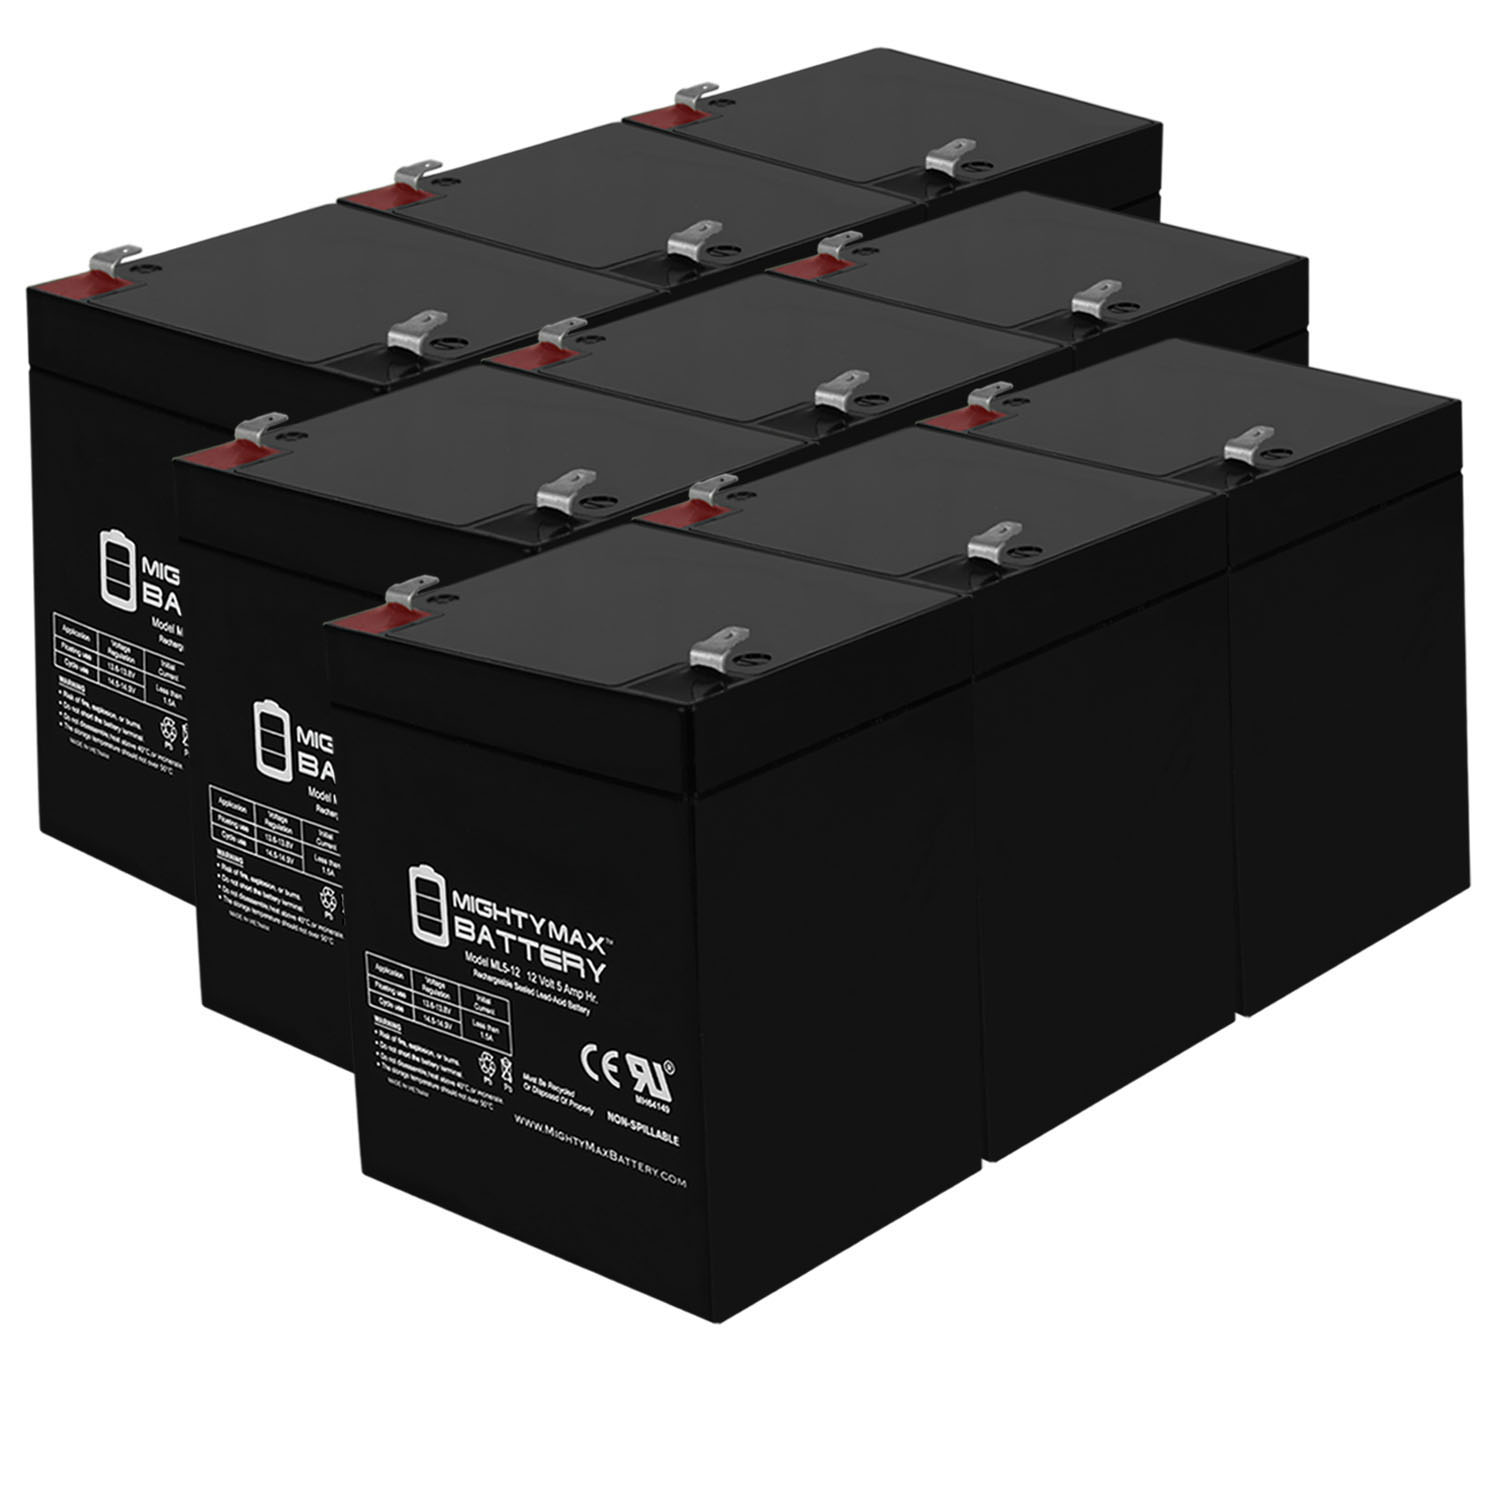 12V 5AH SLA Replacement Battery for Universal Power UB1250 - 9 Pack